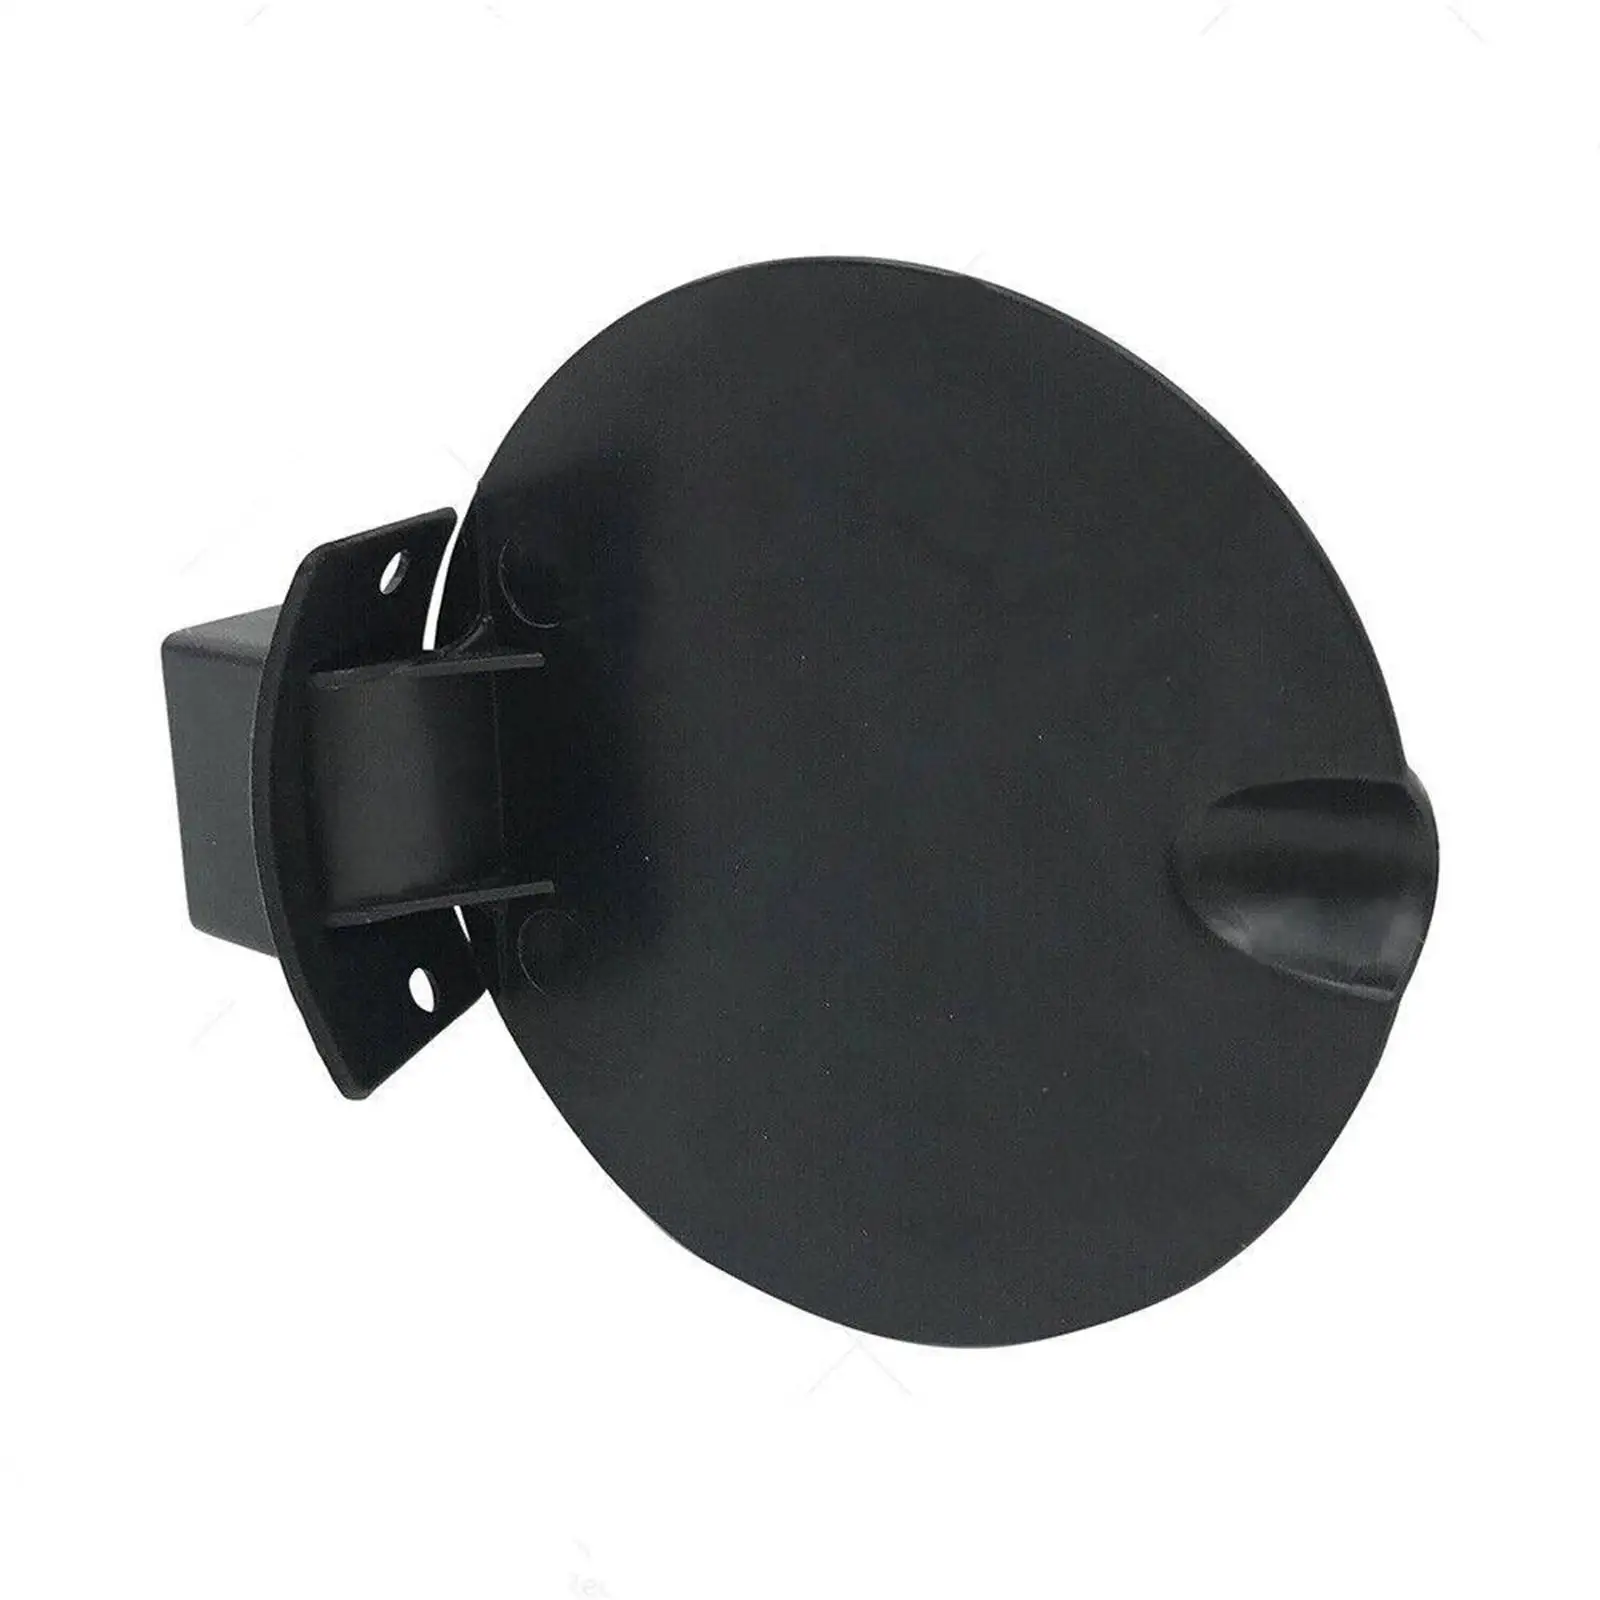 Fuel Flap Cover Gas Cap Repair Fuel Filler Flap Cover Lid for Holden Commodore VU Vy Vz Durable Lightweight